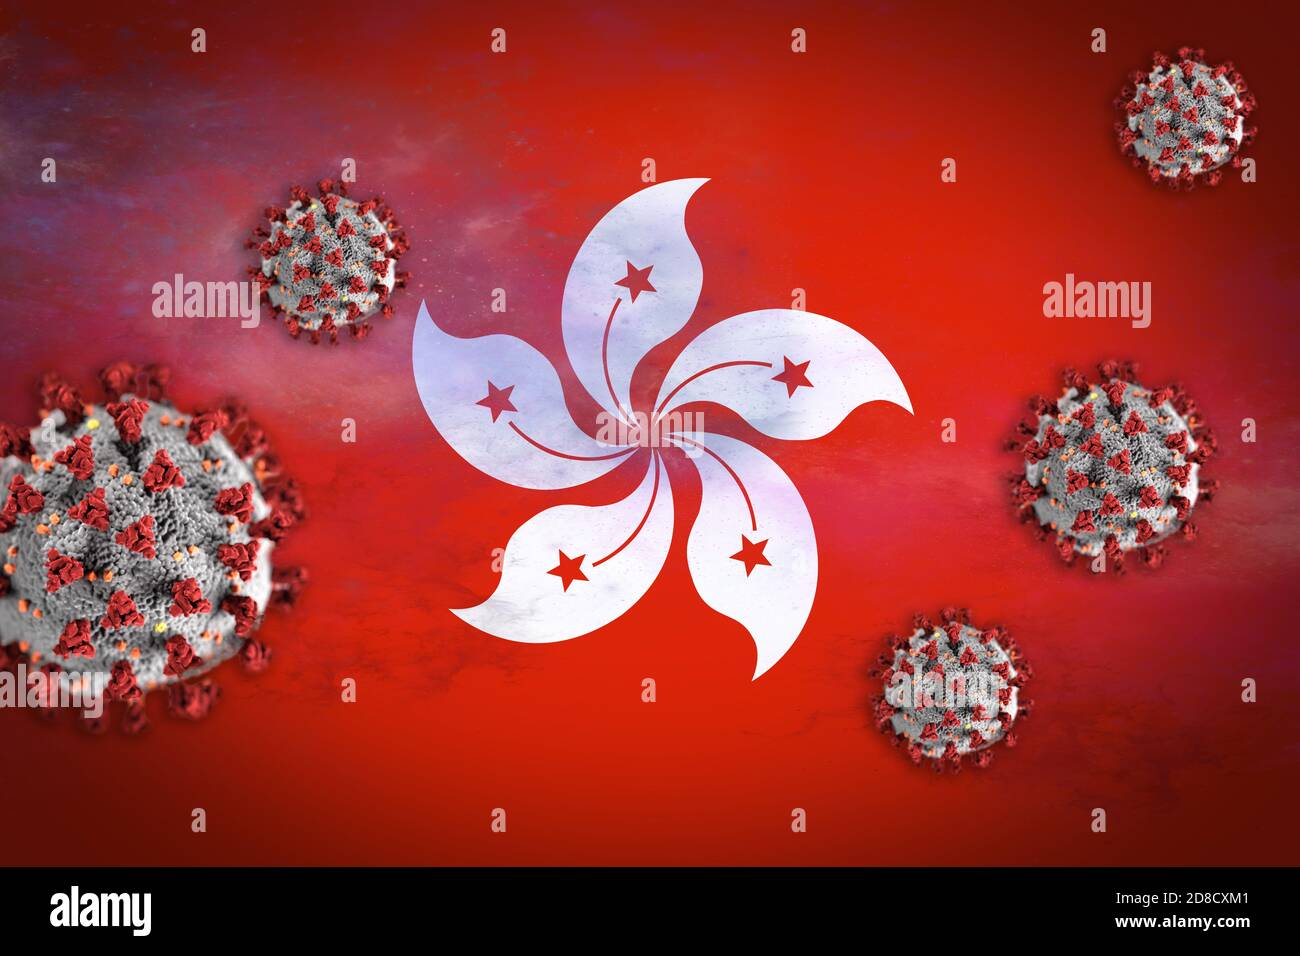 Concept illustration of Coronavirus or Covid-19 particles overshadowing flag of Hongkong symbolising outbreak. Stock Photo